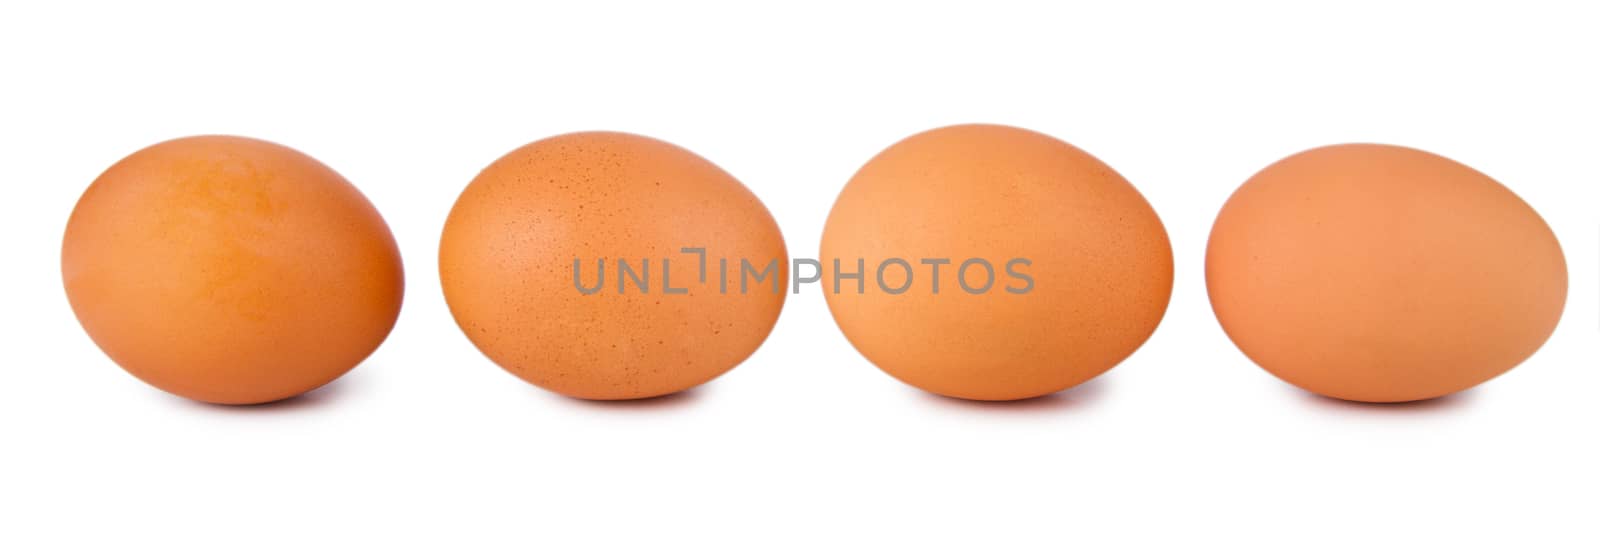 Four fresh brown eggs isolated on a white background